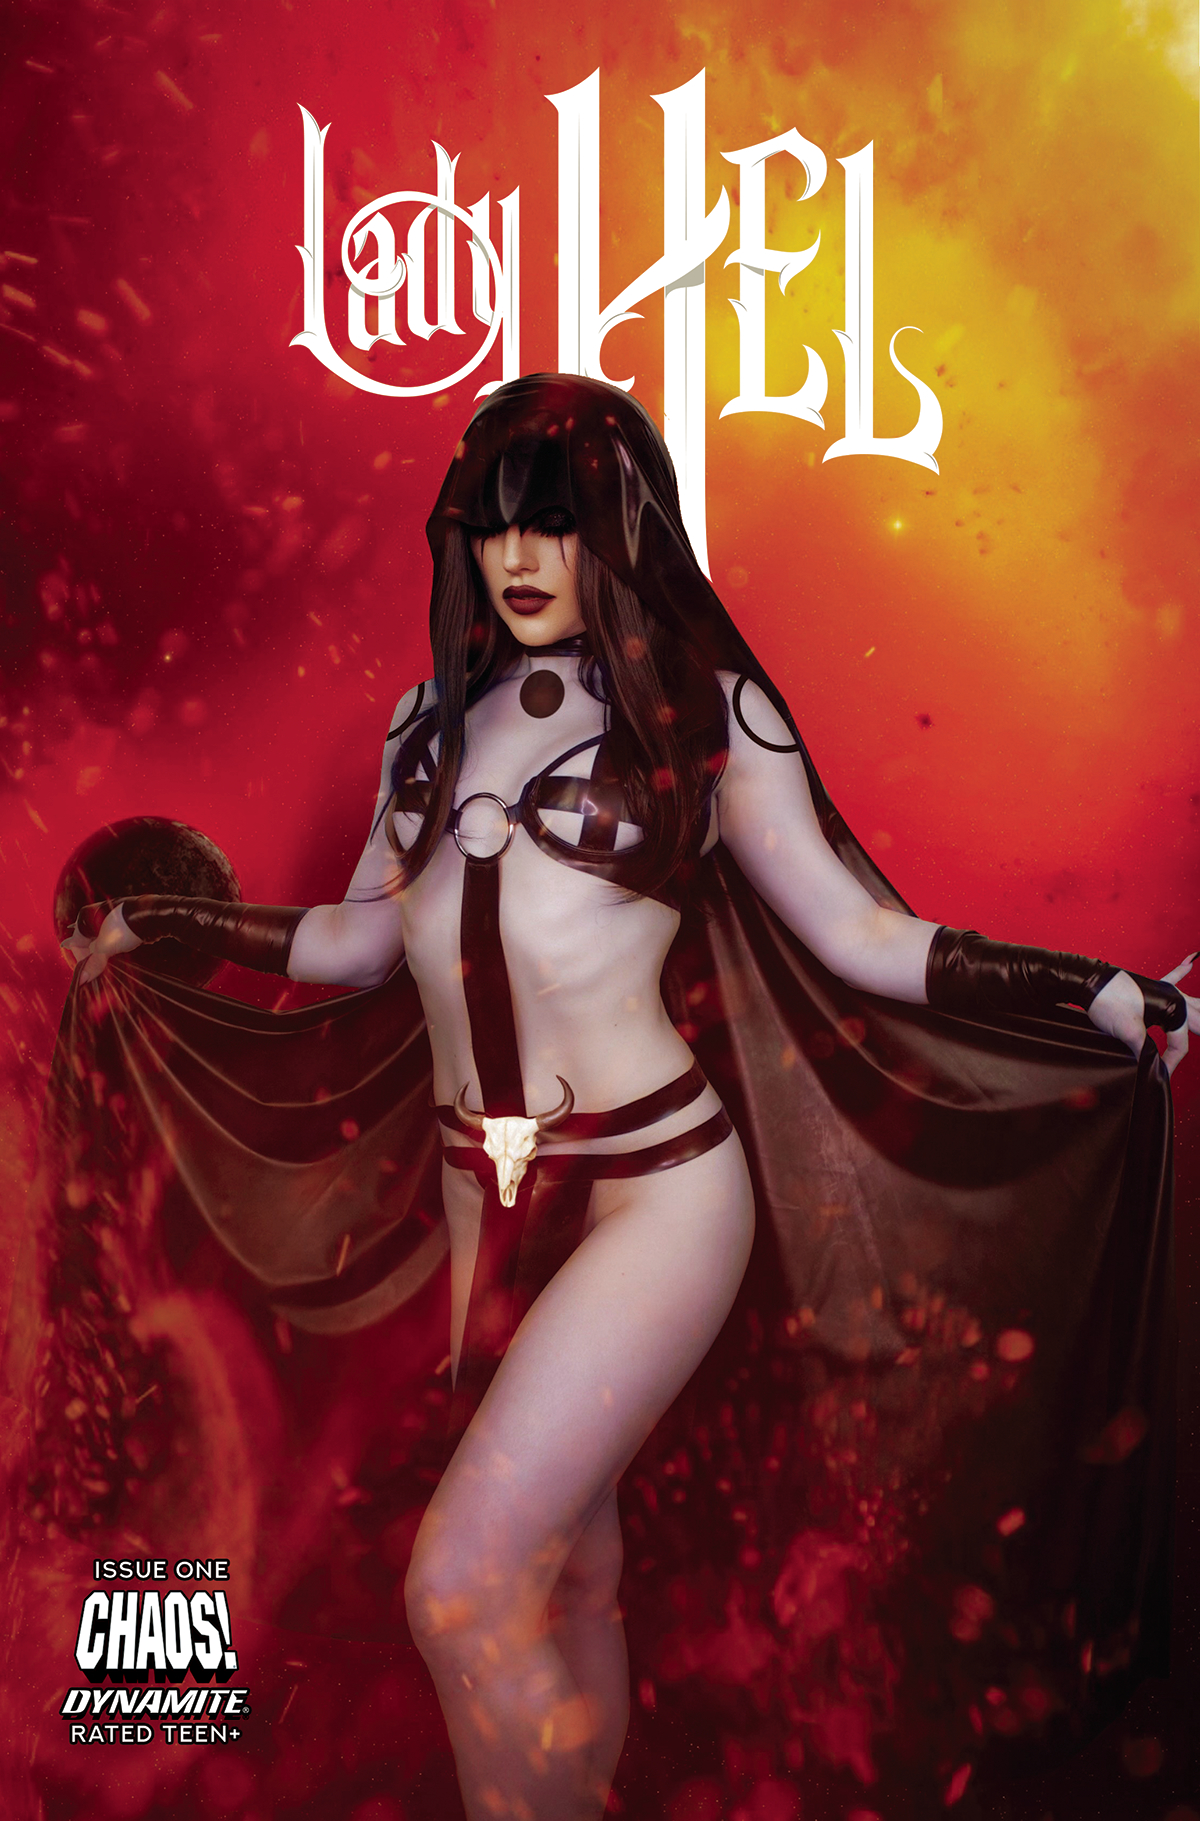 Lady Hel #1 Cover E Cosplay